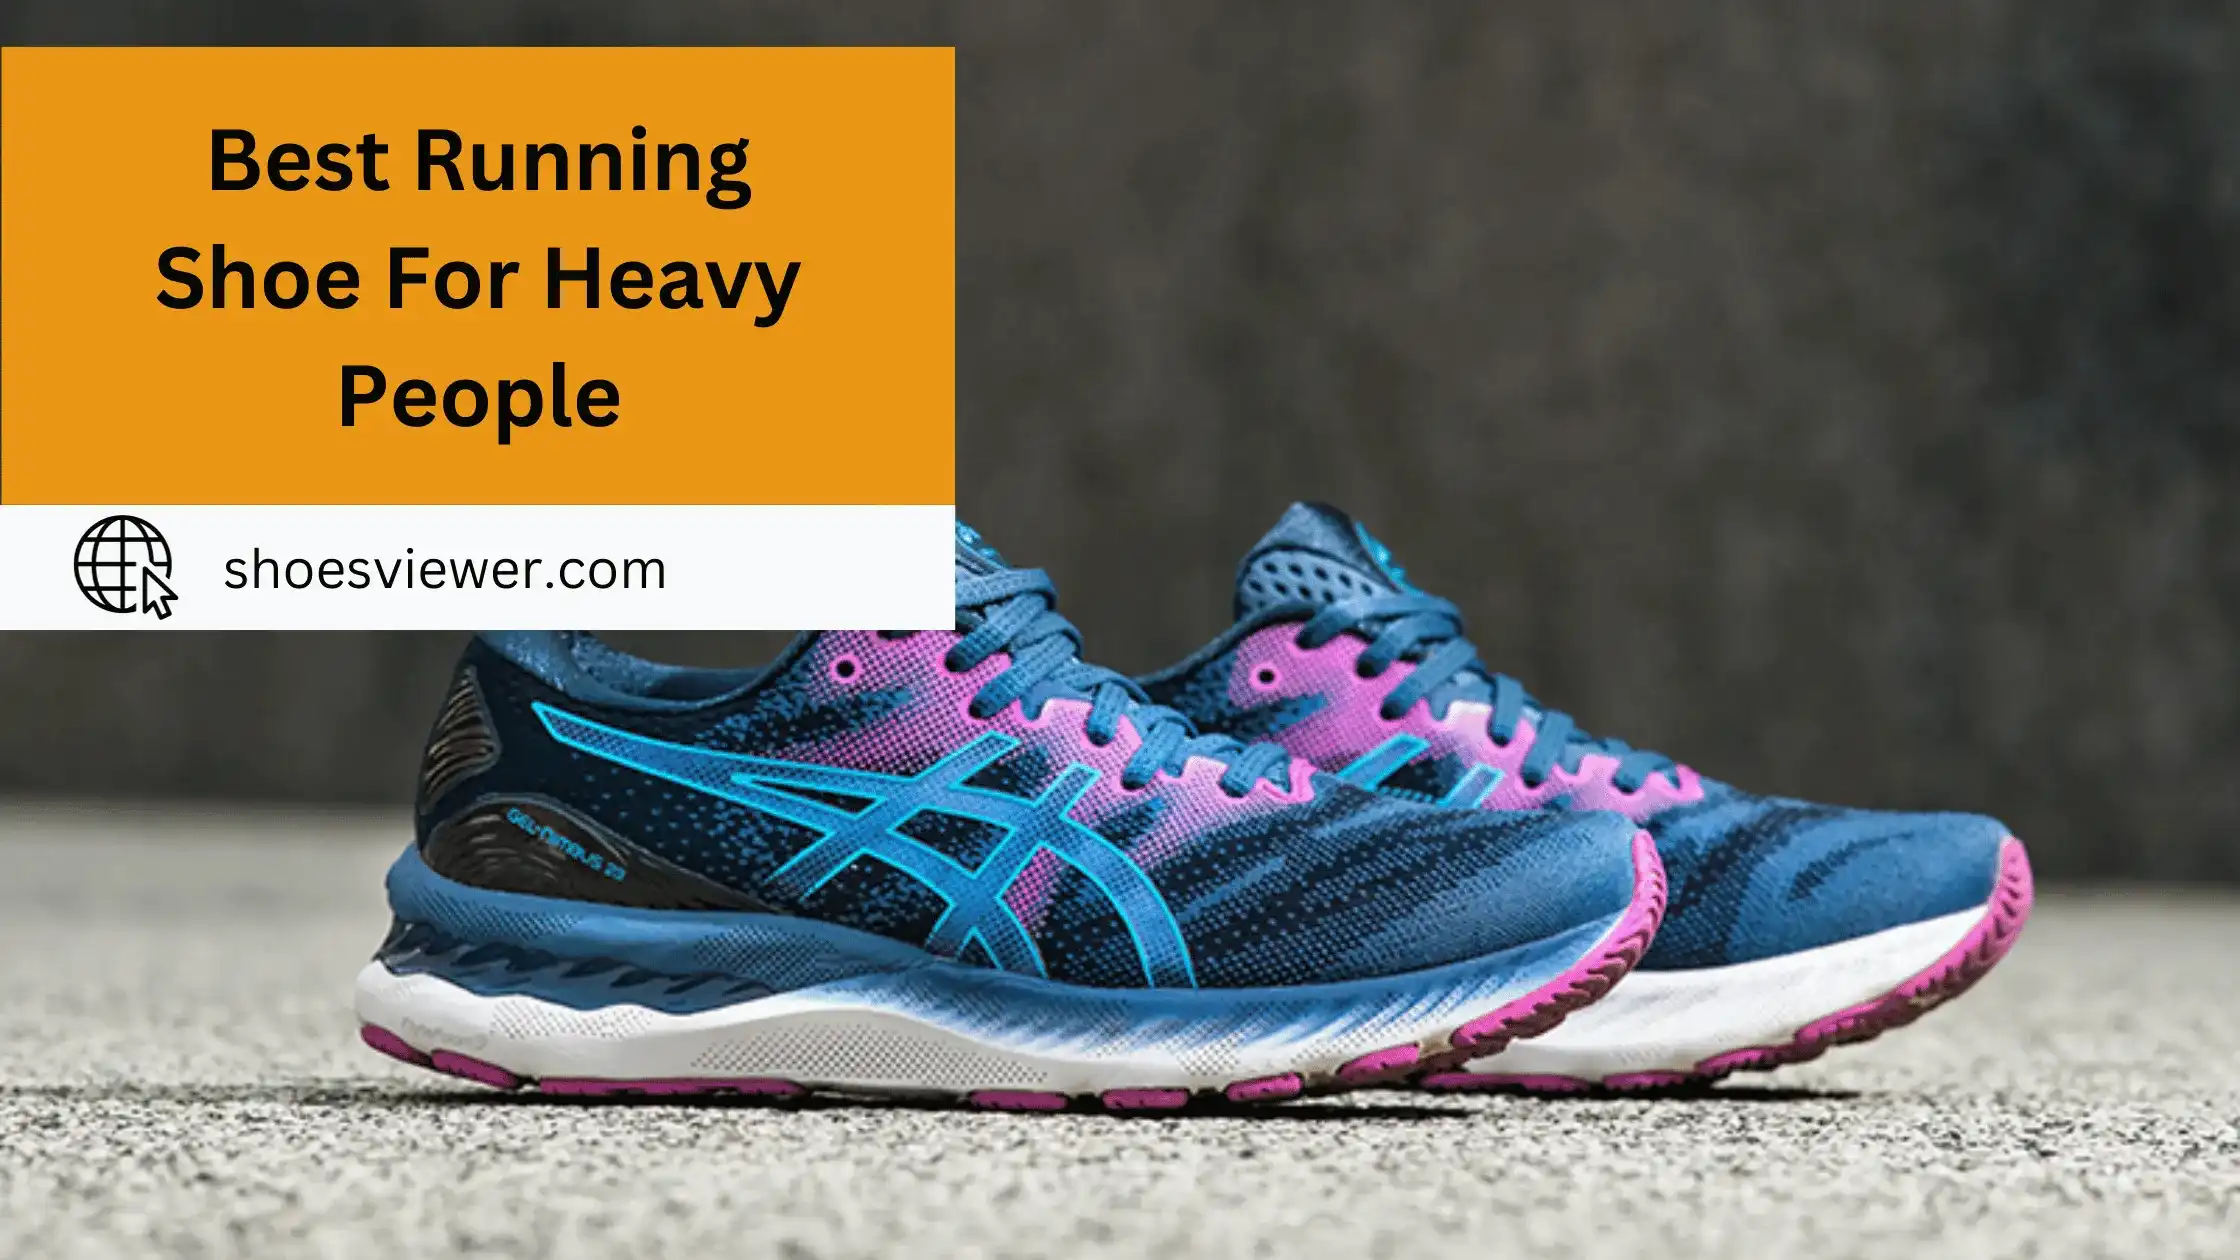 Best Running Shoe For Heavy People - Expert Analysis